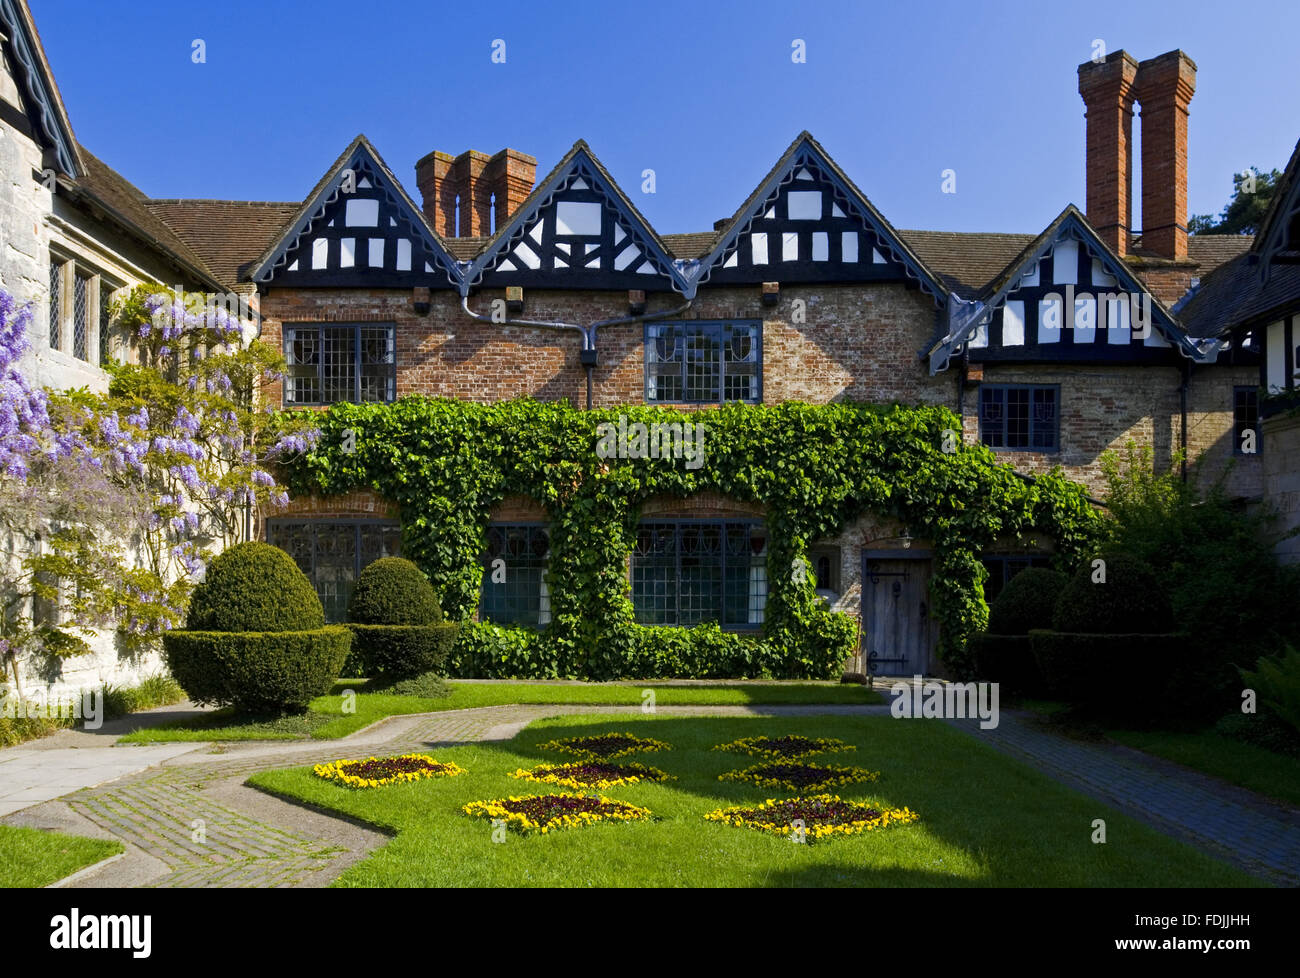 The Courtyard at Baddesley Clinton, Warwickshire. The Courtyard garden was created in 1889 by Edward Heneage Dering with the lozenges of the Ferrers family coat of arms laid out on the lawn as flowerbeds.. Stock Photo